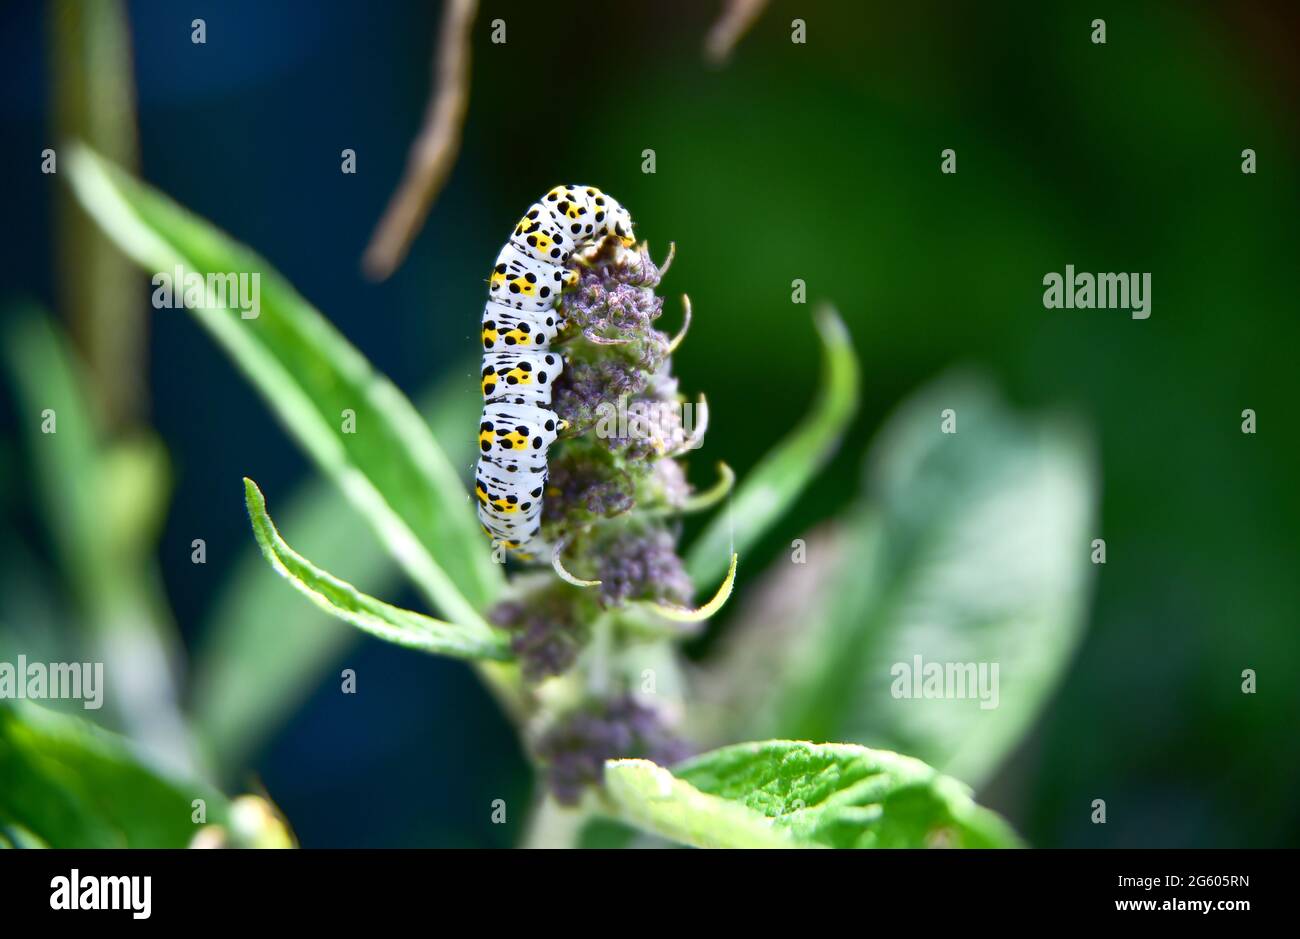 Brighton UK 1st July 2021 - A mullein moth (Cucullia verbasci) caterpillar eating a buddleia plant enjoys the warm sunshine in a Brighton garden today . An infestation of the mullein moth caterpillars can cause devastation to buddleia plants and cause problems to gardeners in Britain   : Credit Simon Dack / Alamy Live News Stock Photo